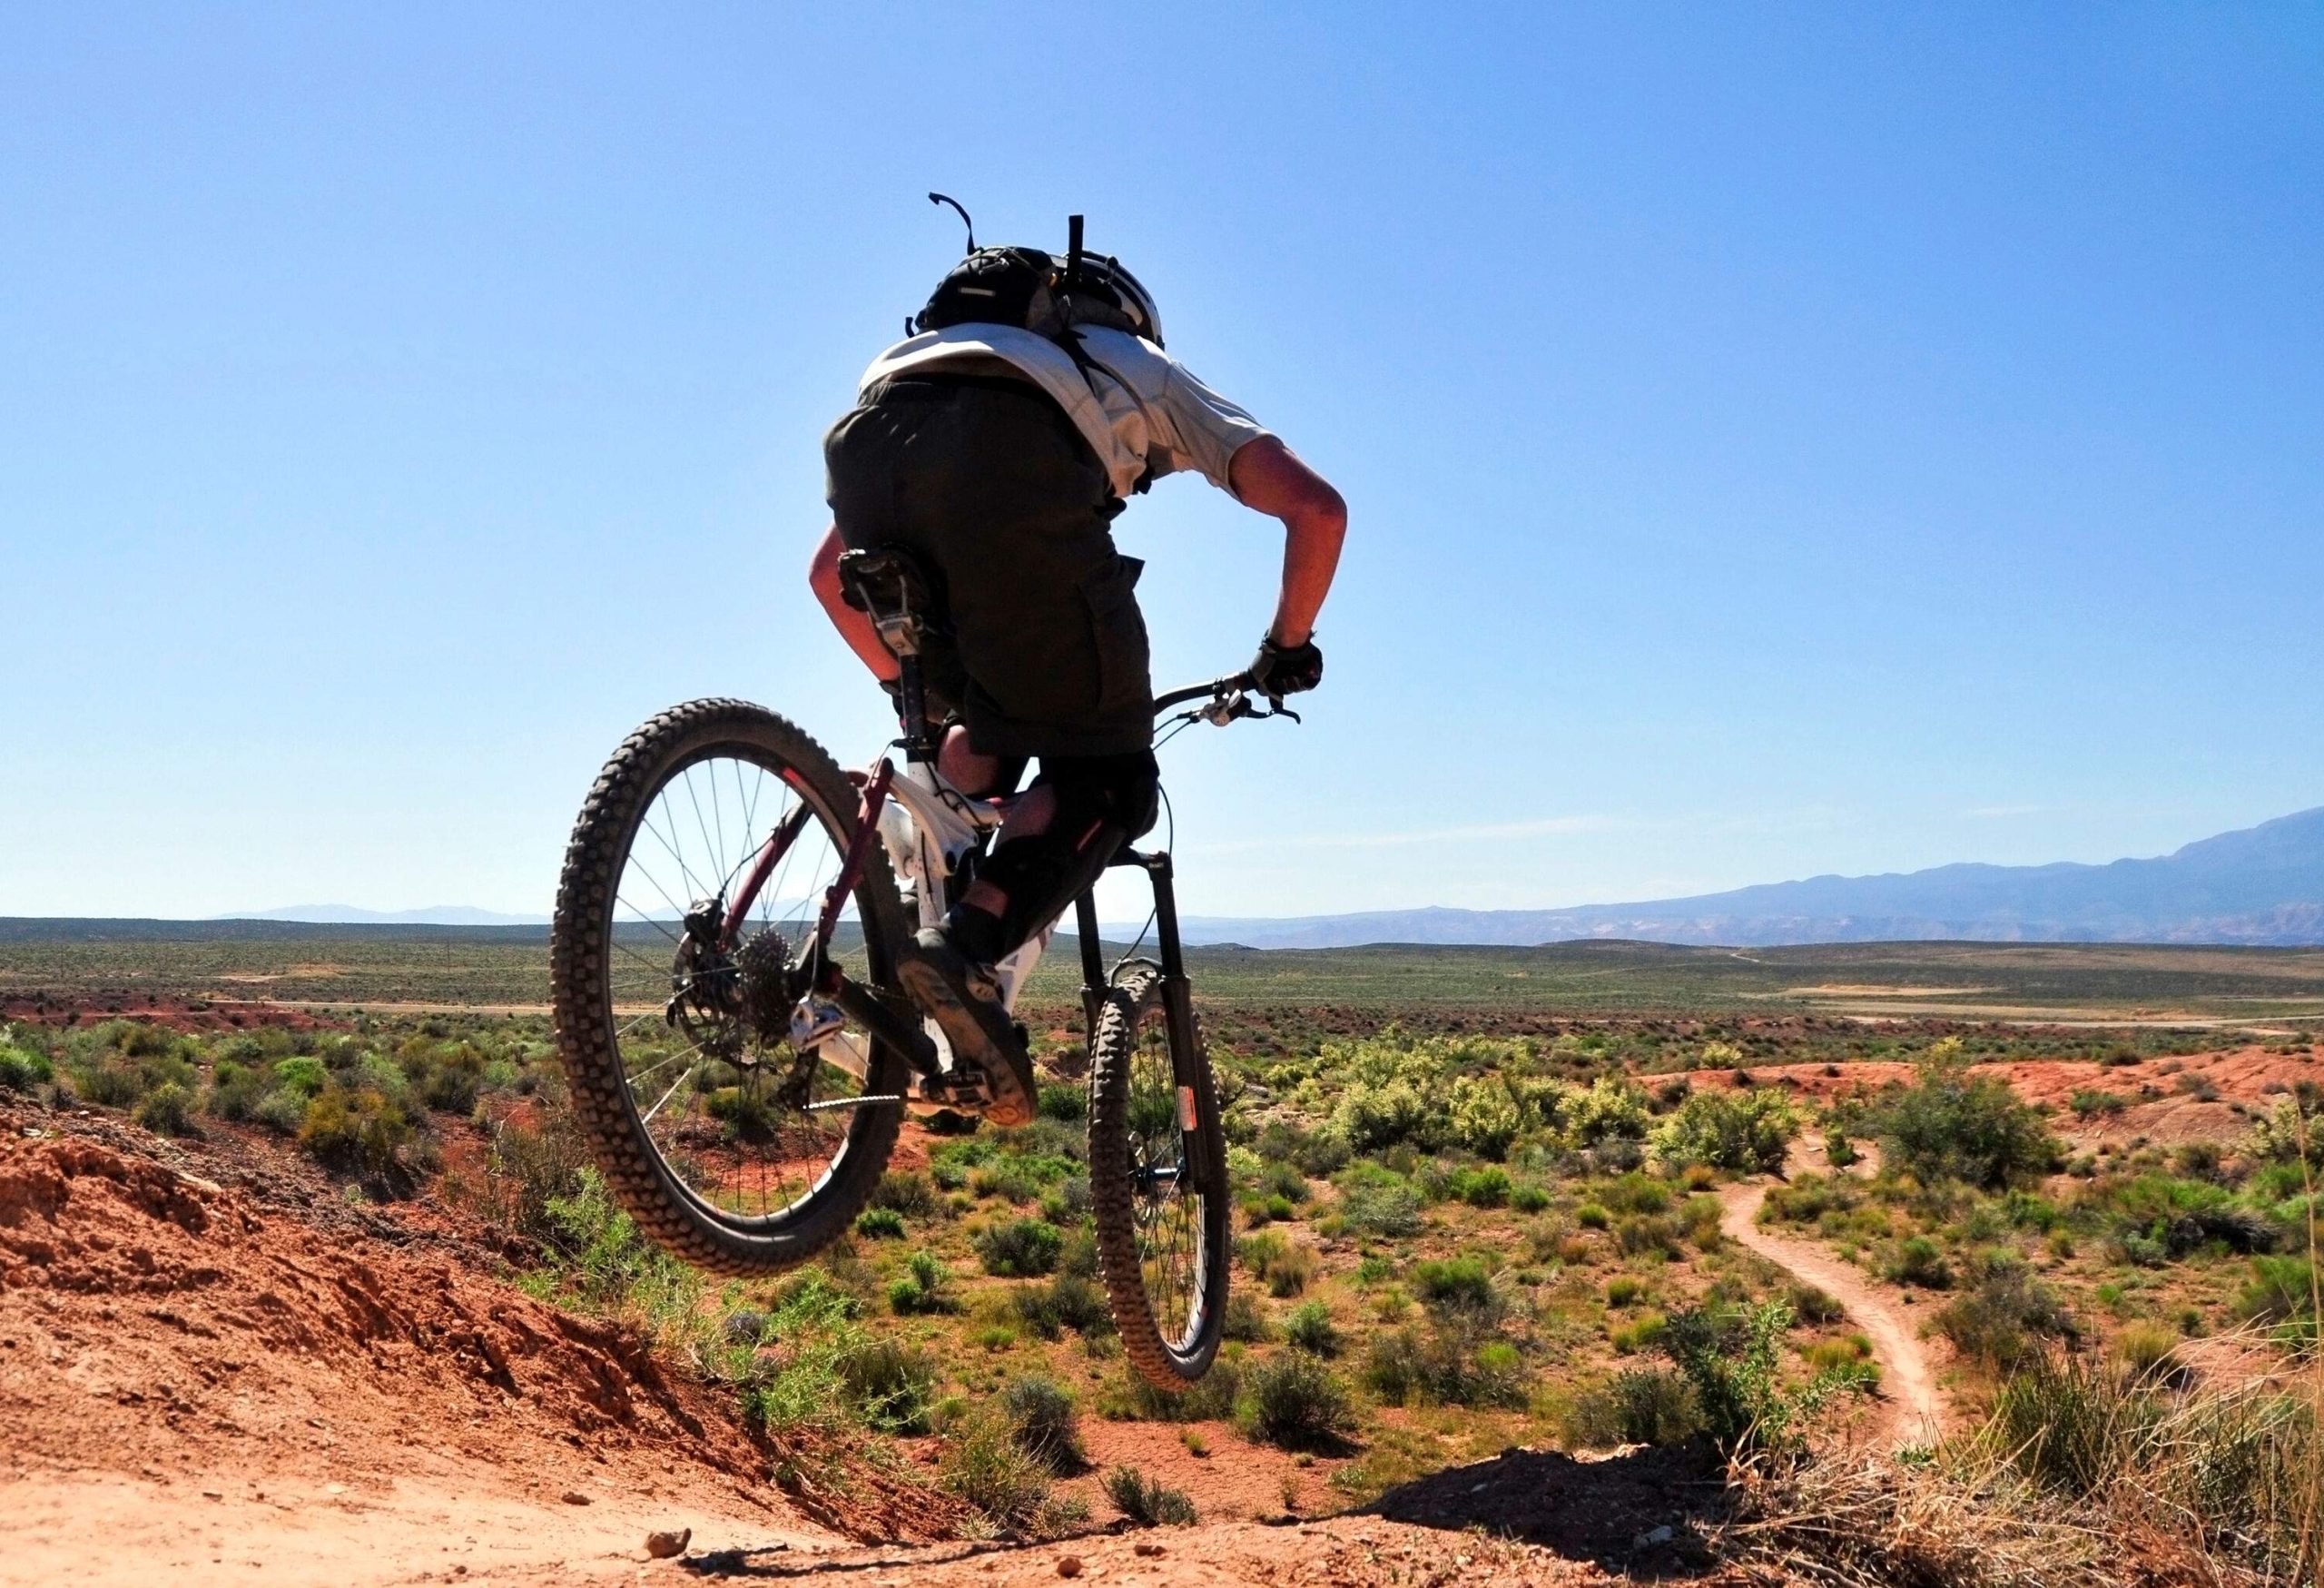 A man confidently rides his bike across a vast, barren, and grassy landscape, basking in the beauty of the clear blue sky above. 